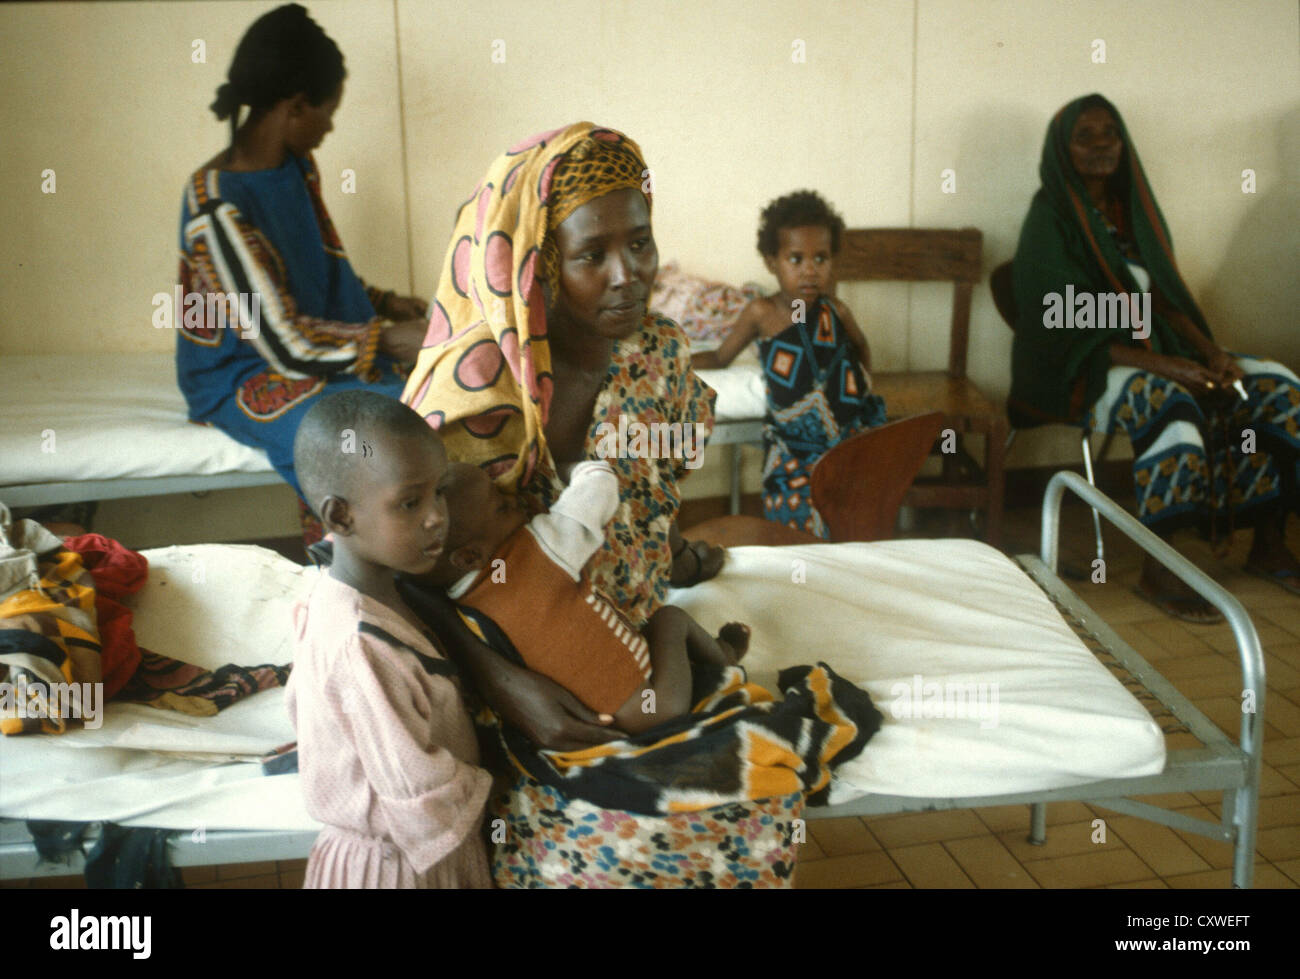 A MOTHER AND BABY HOSPITAL IN MOGADISHU EAST AFRICA Stock Photo